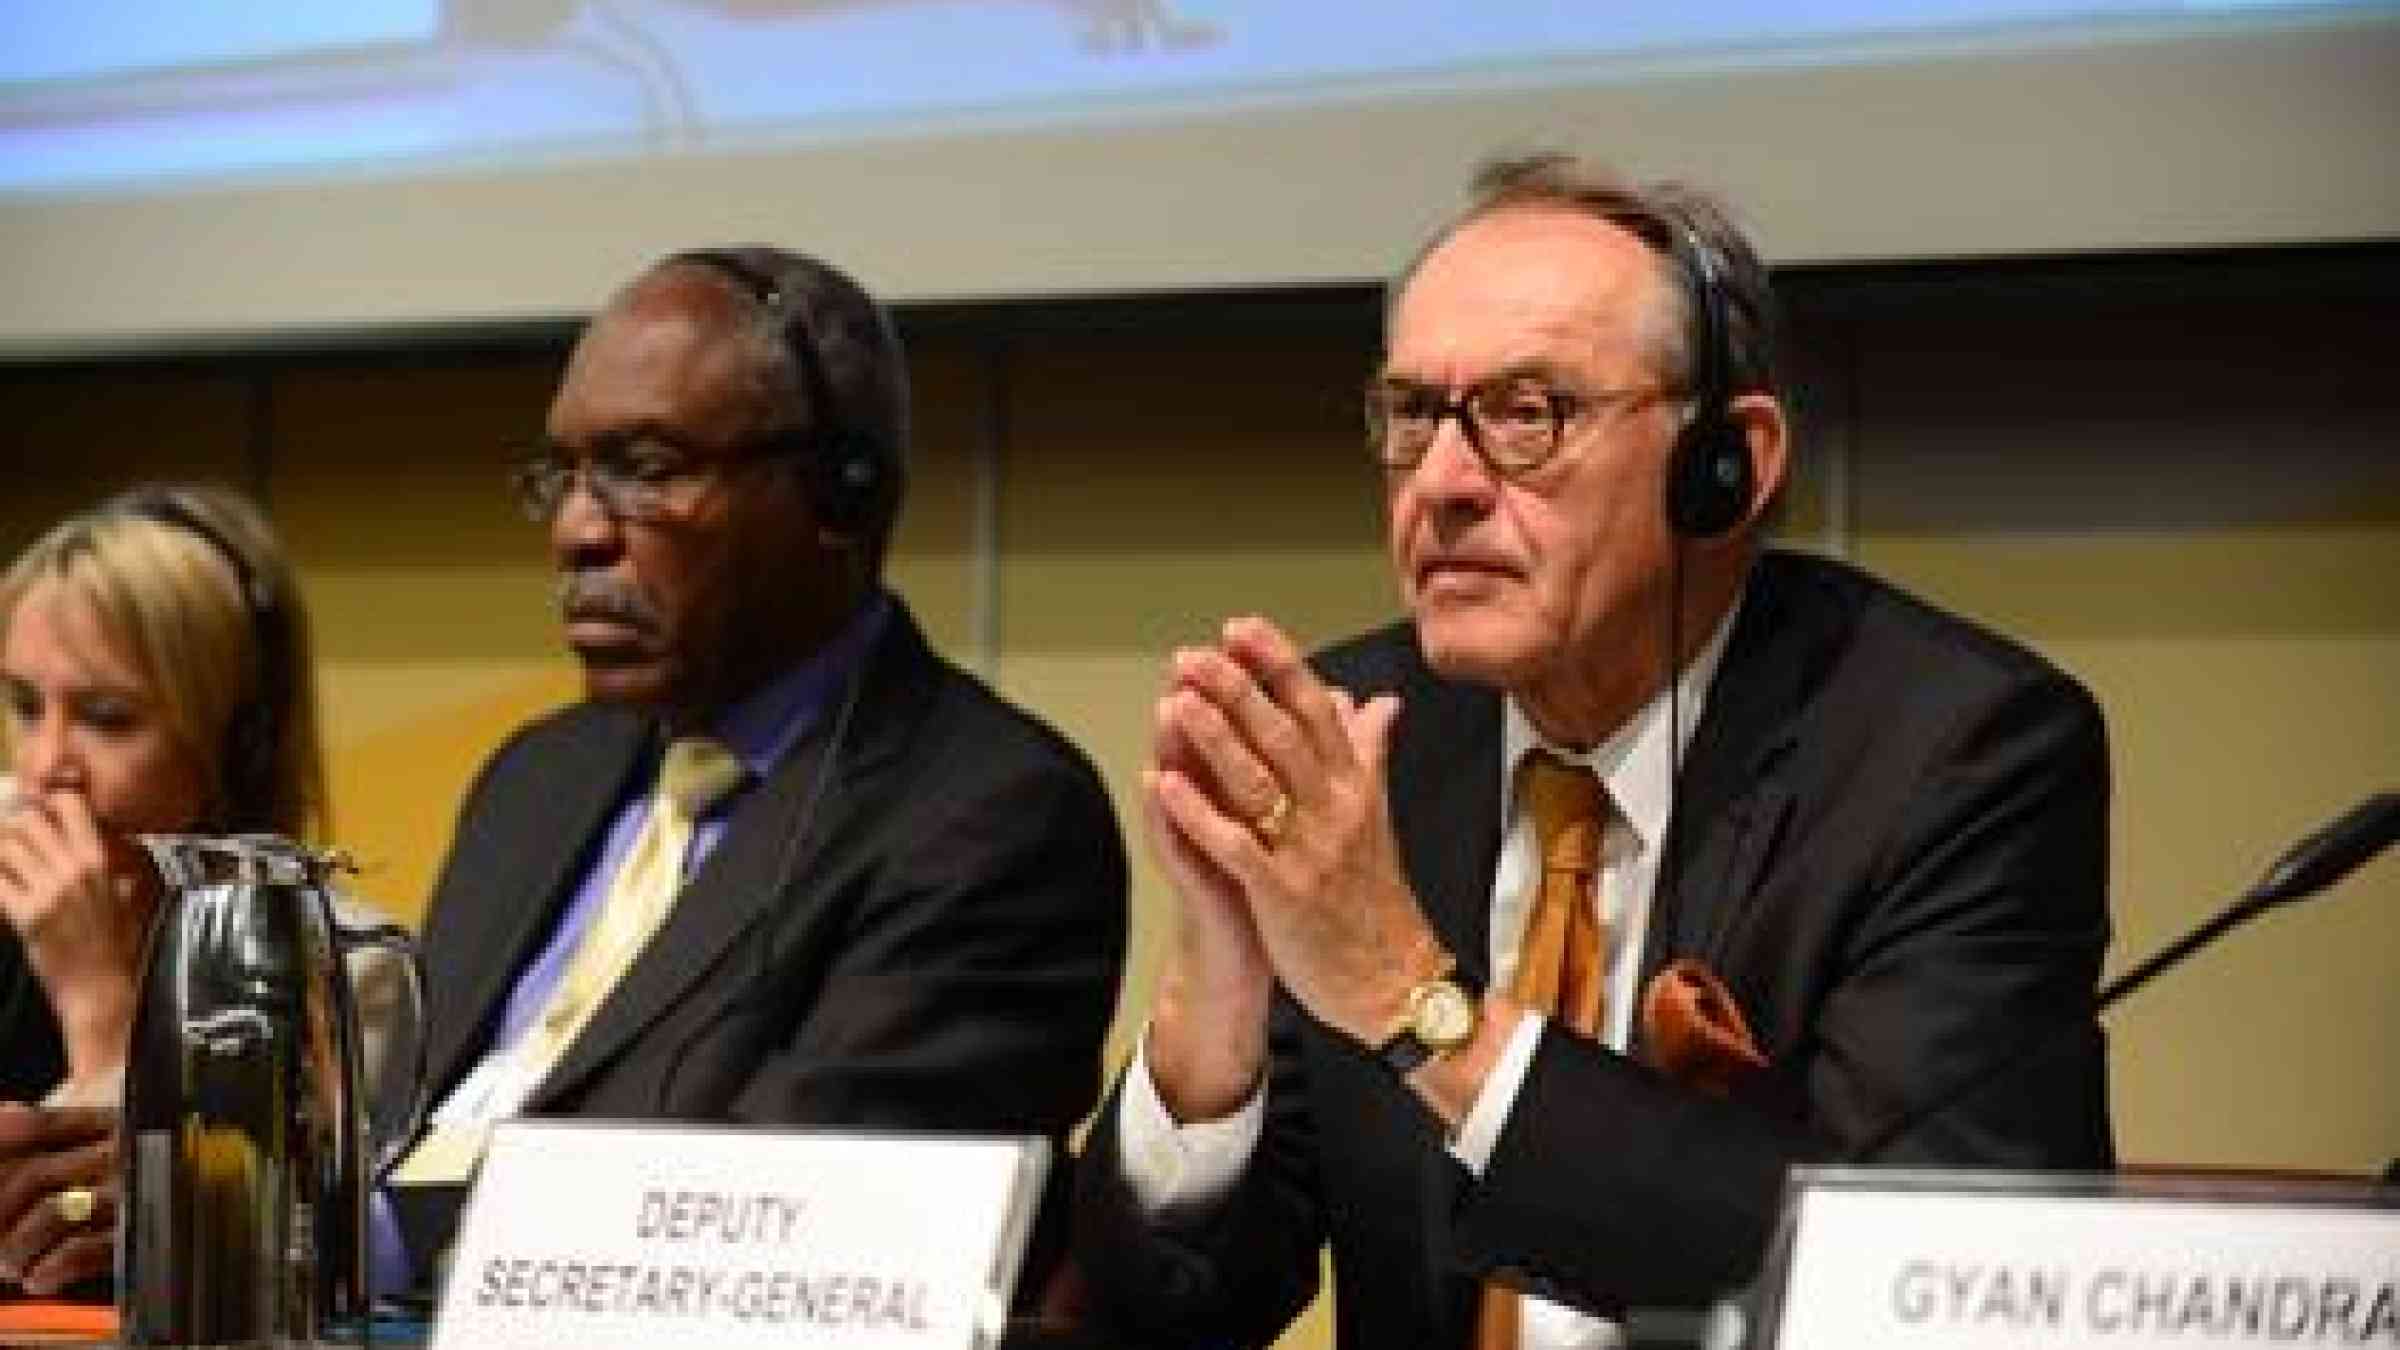 UN Deputy Secretary-General Jan Eliasson listens to the discussions in a featured event on strengthening partnerships towards disaster risk reduction for small island developing states.